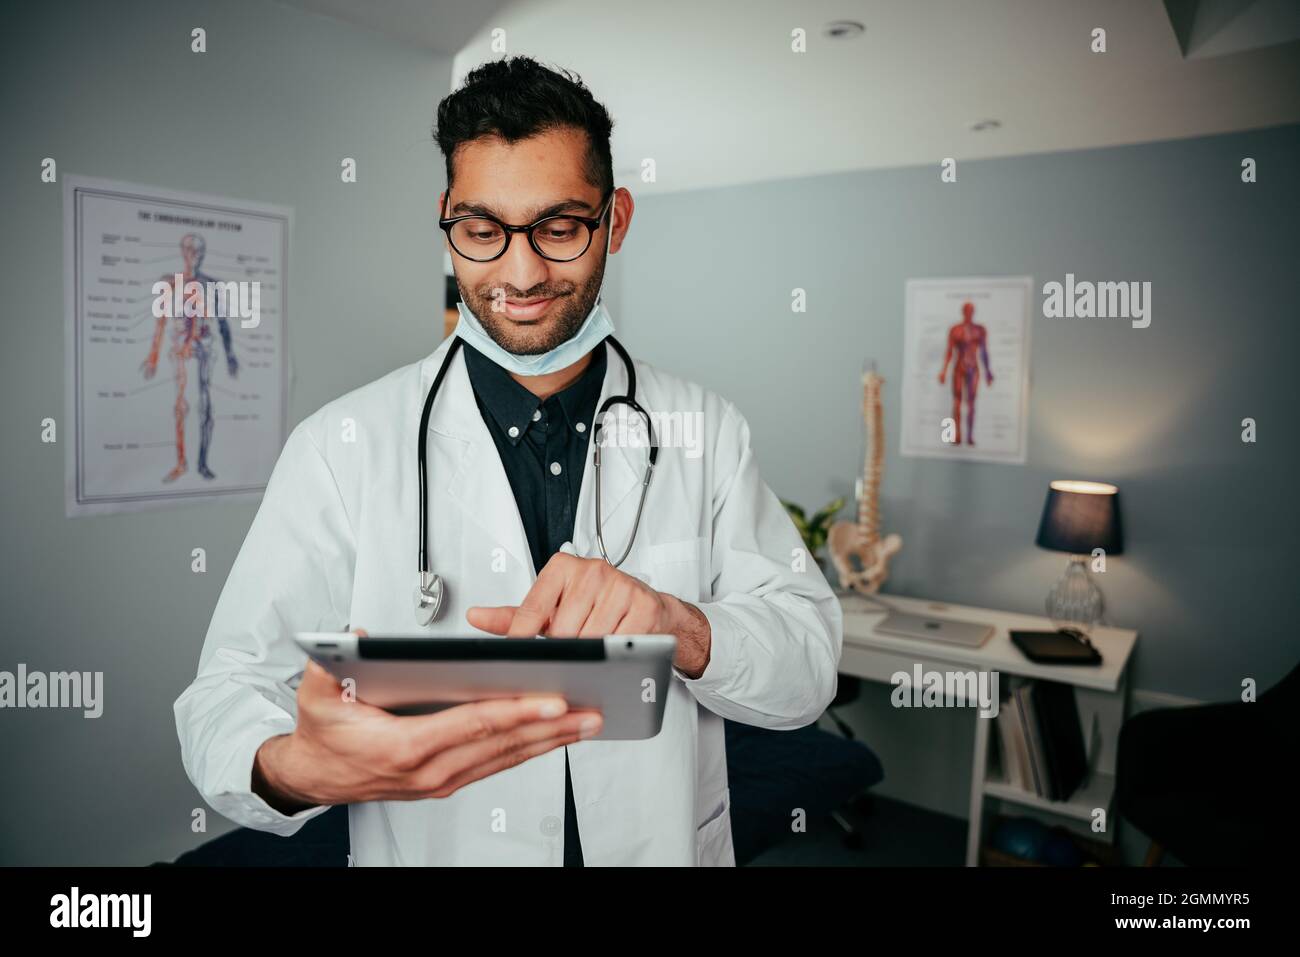 Mixed race male nurse smiling wearing surgical gear standing in clinic holding digital tablet  Stock Photo